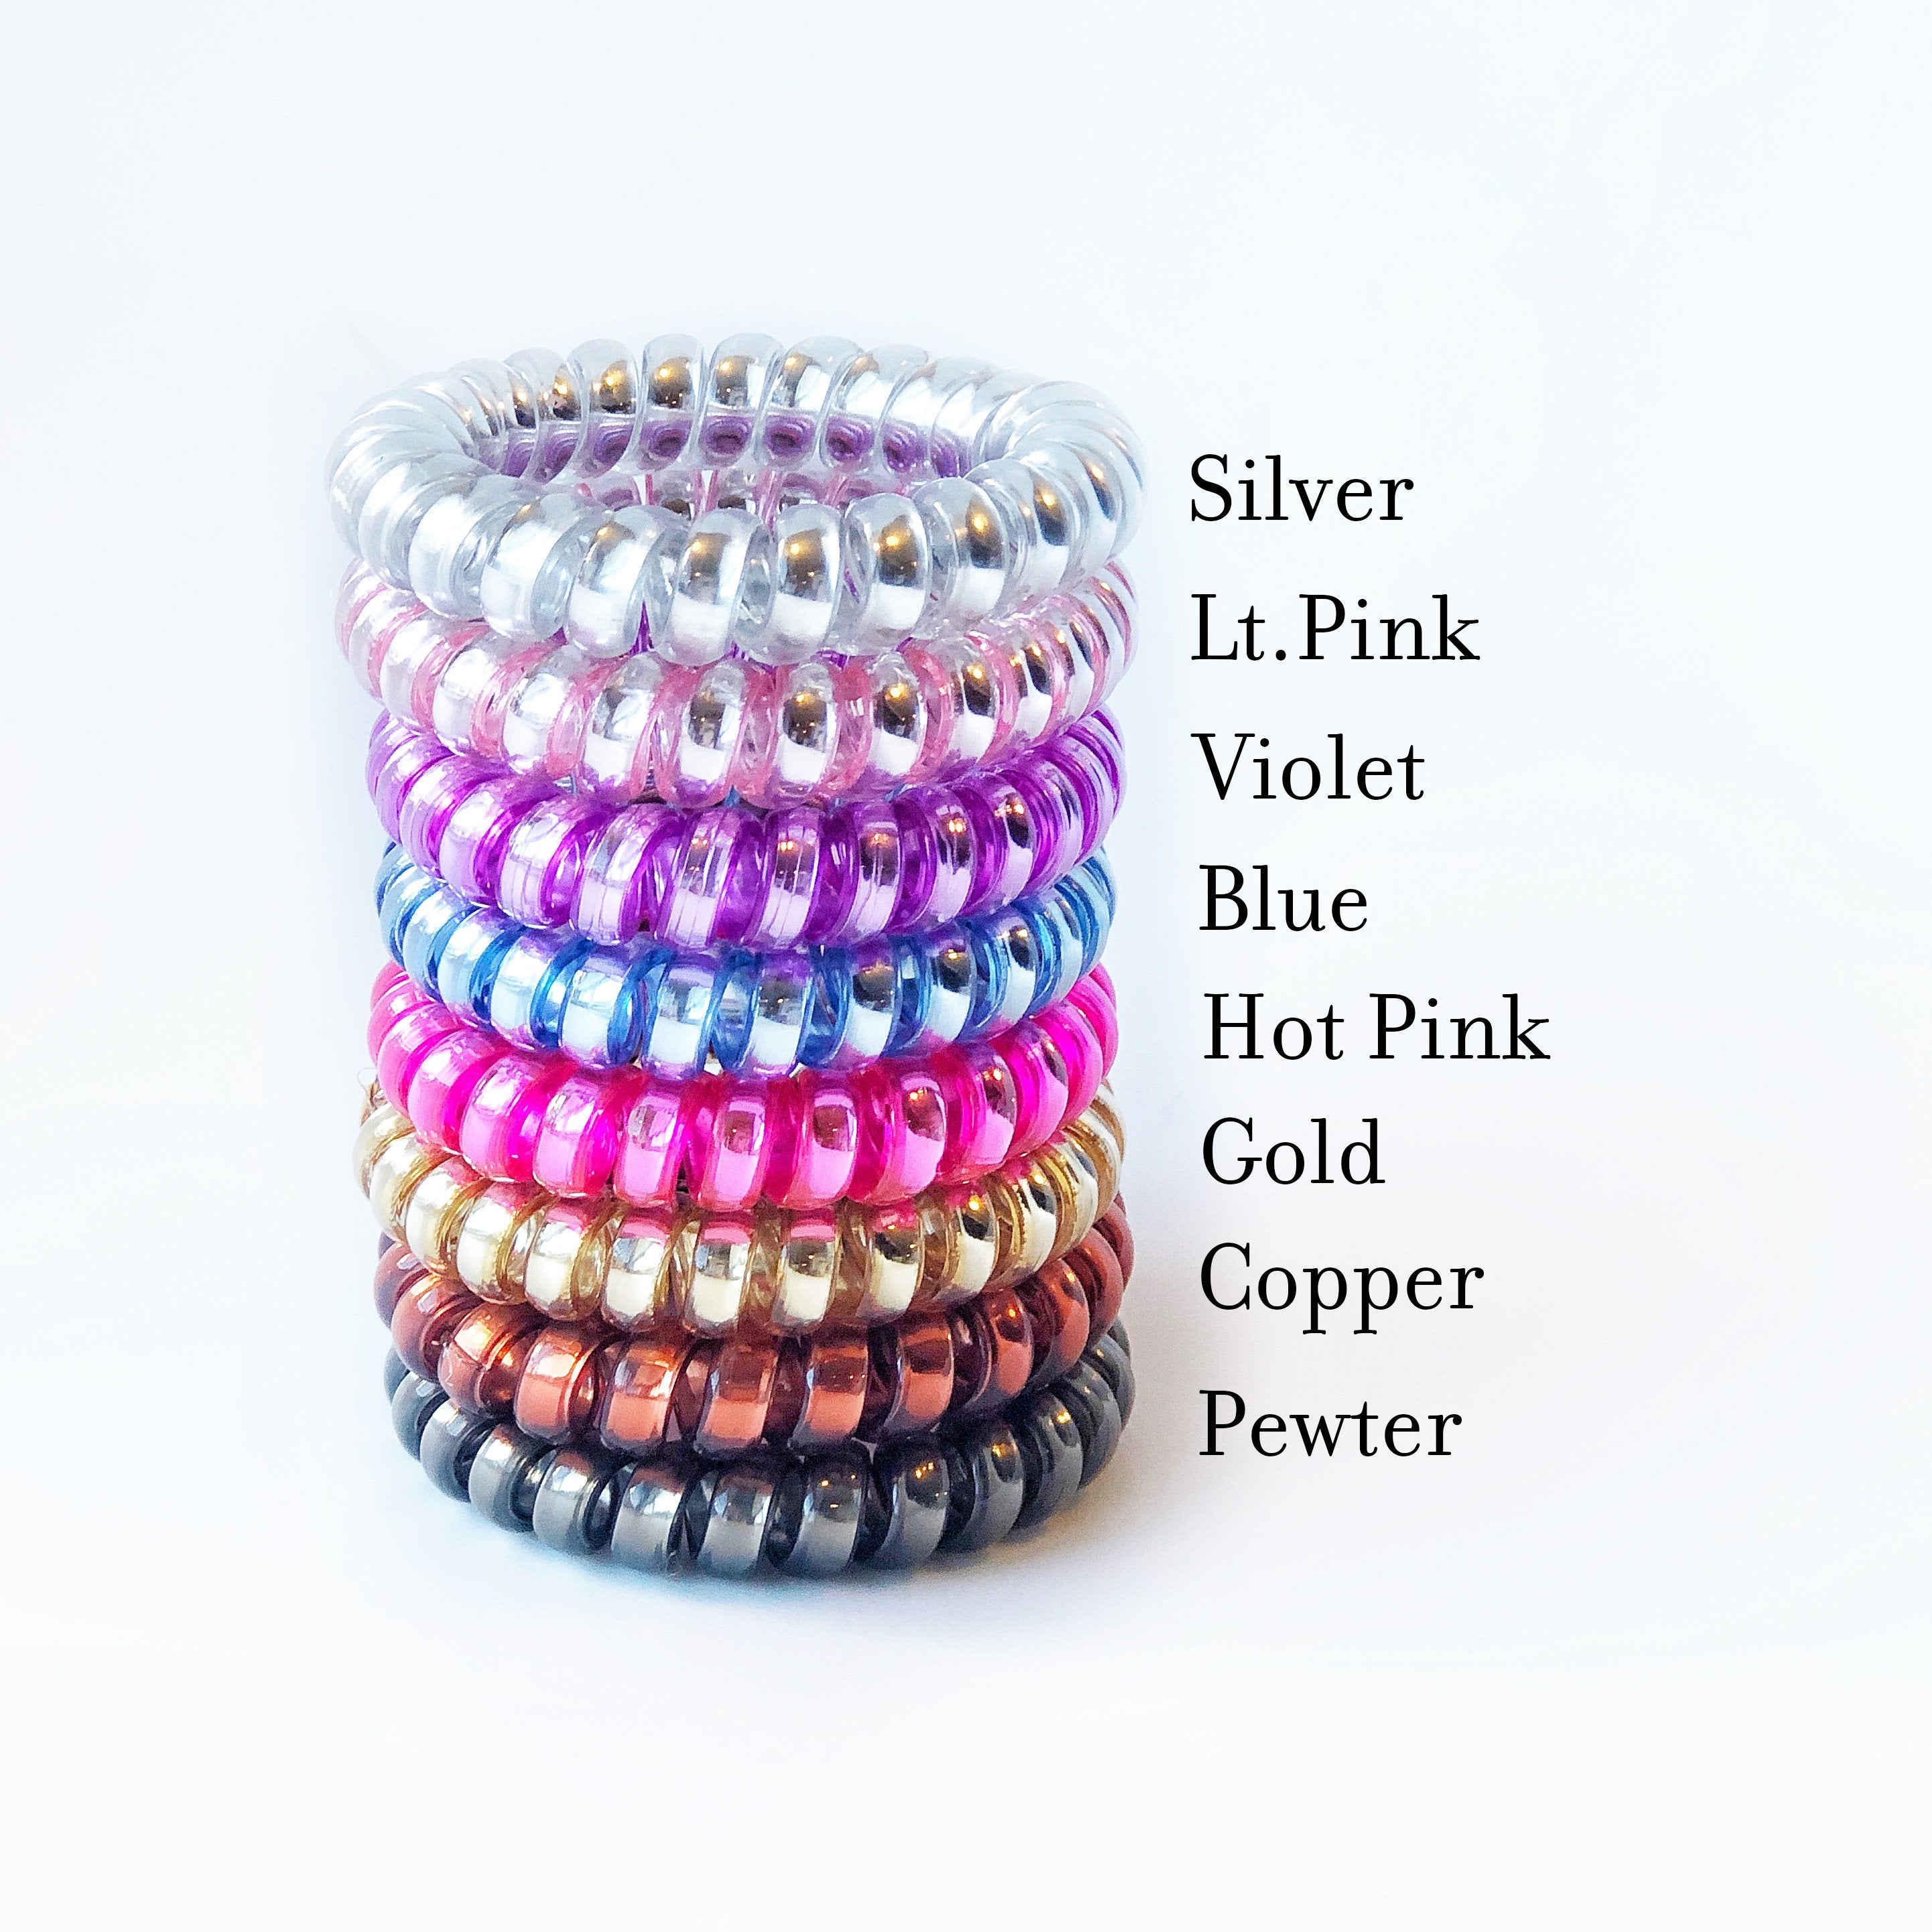 Pop The Champagne She's Changing Her Last Name Bridal Shower Favors, Telephone Cord Spiral Hair Ties - @PlumPolkaDot 